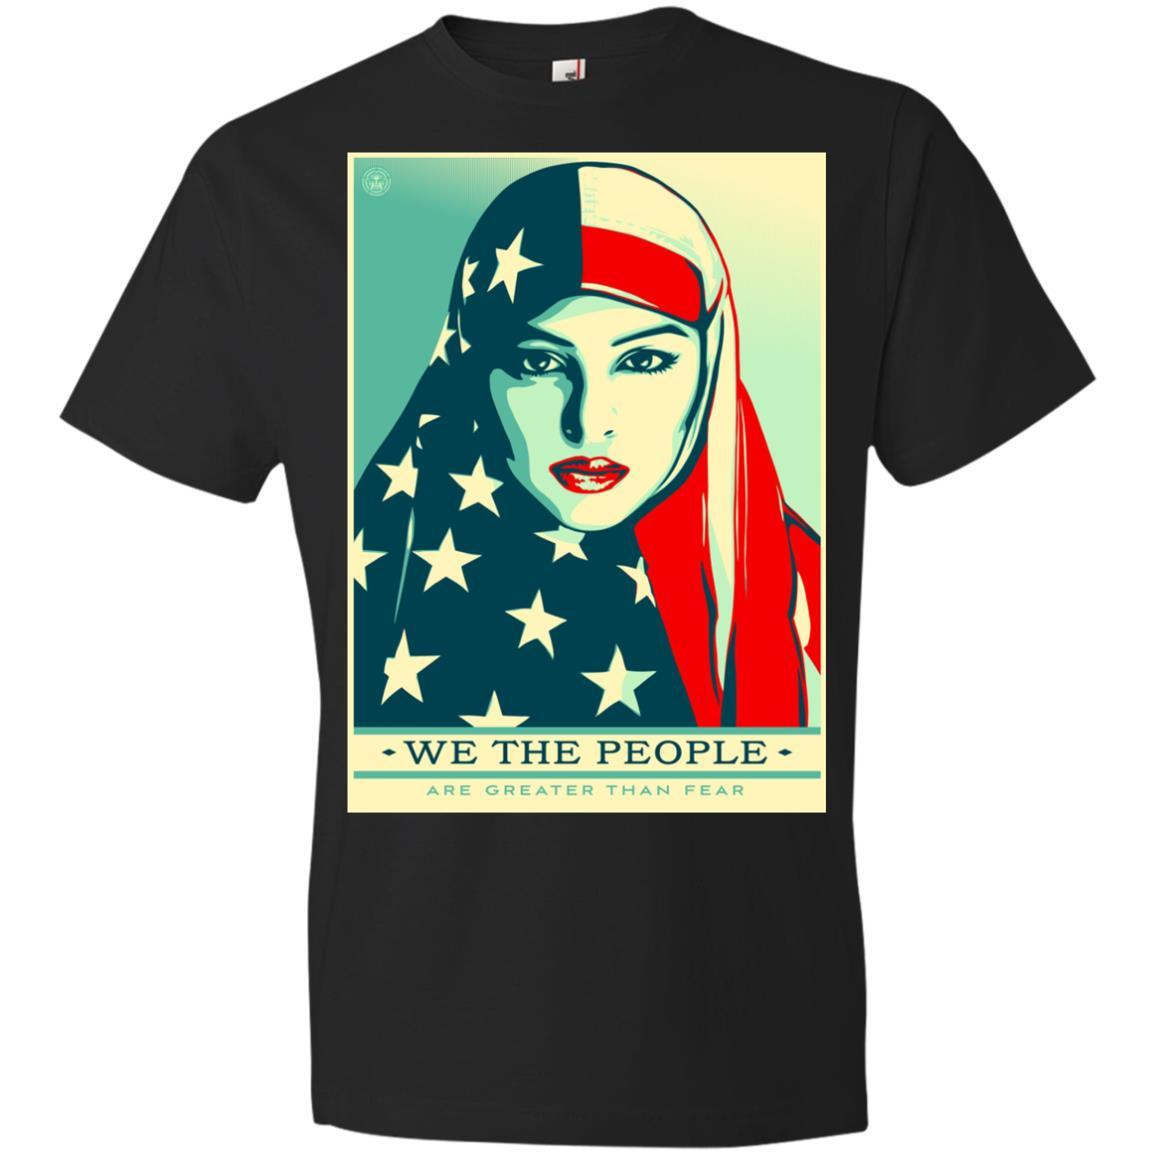 we the people are greater than fear - Anvil Lightweight T-Shirt Style / Color / Size